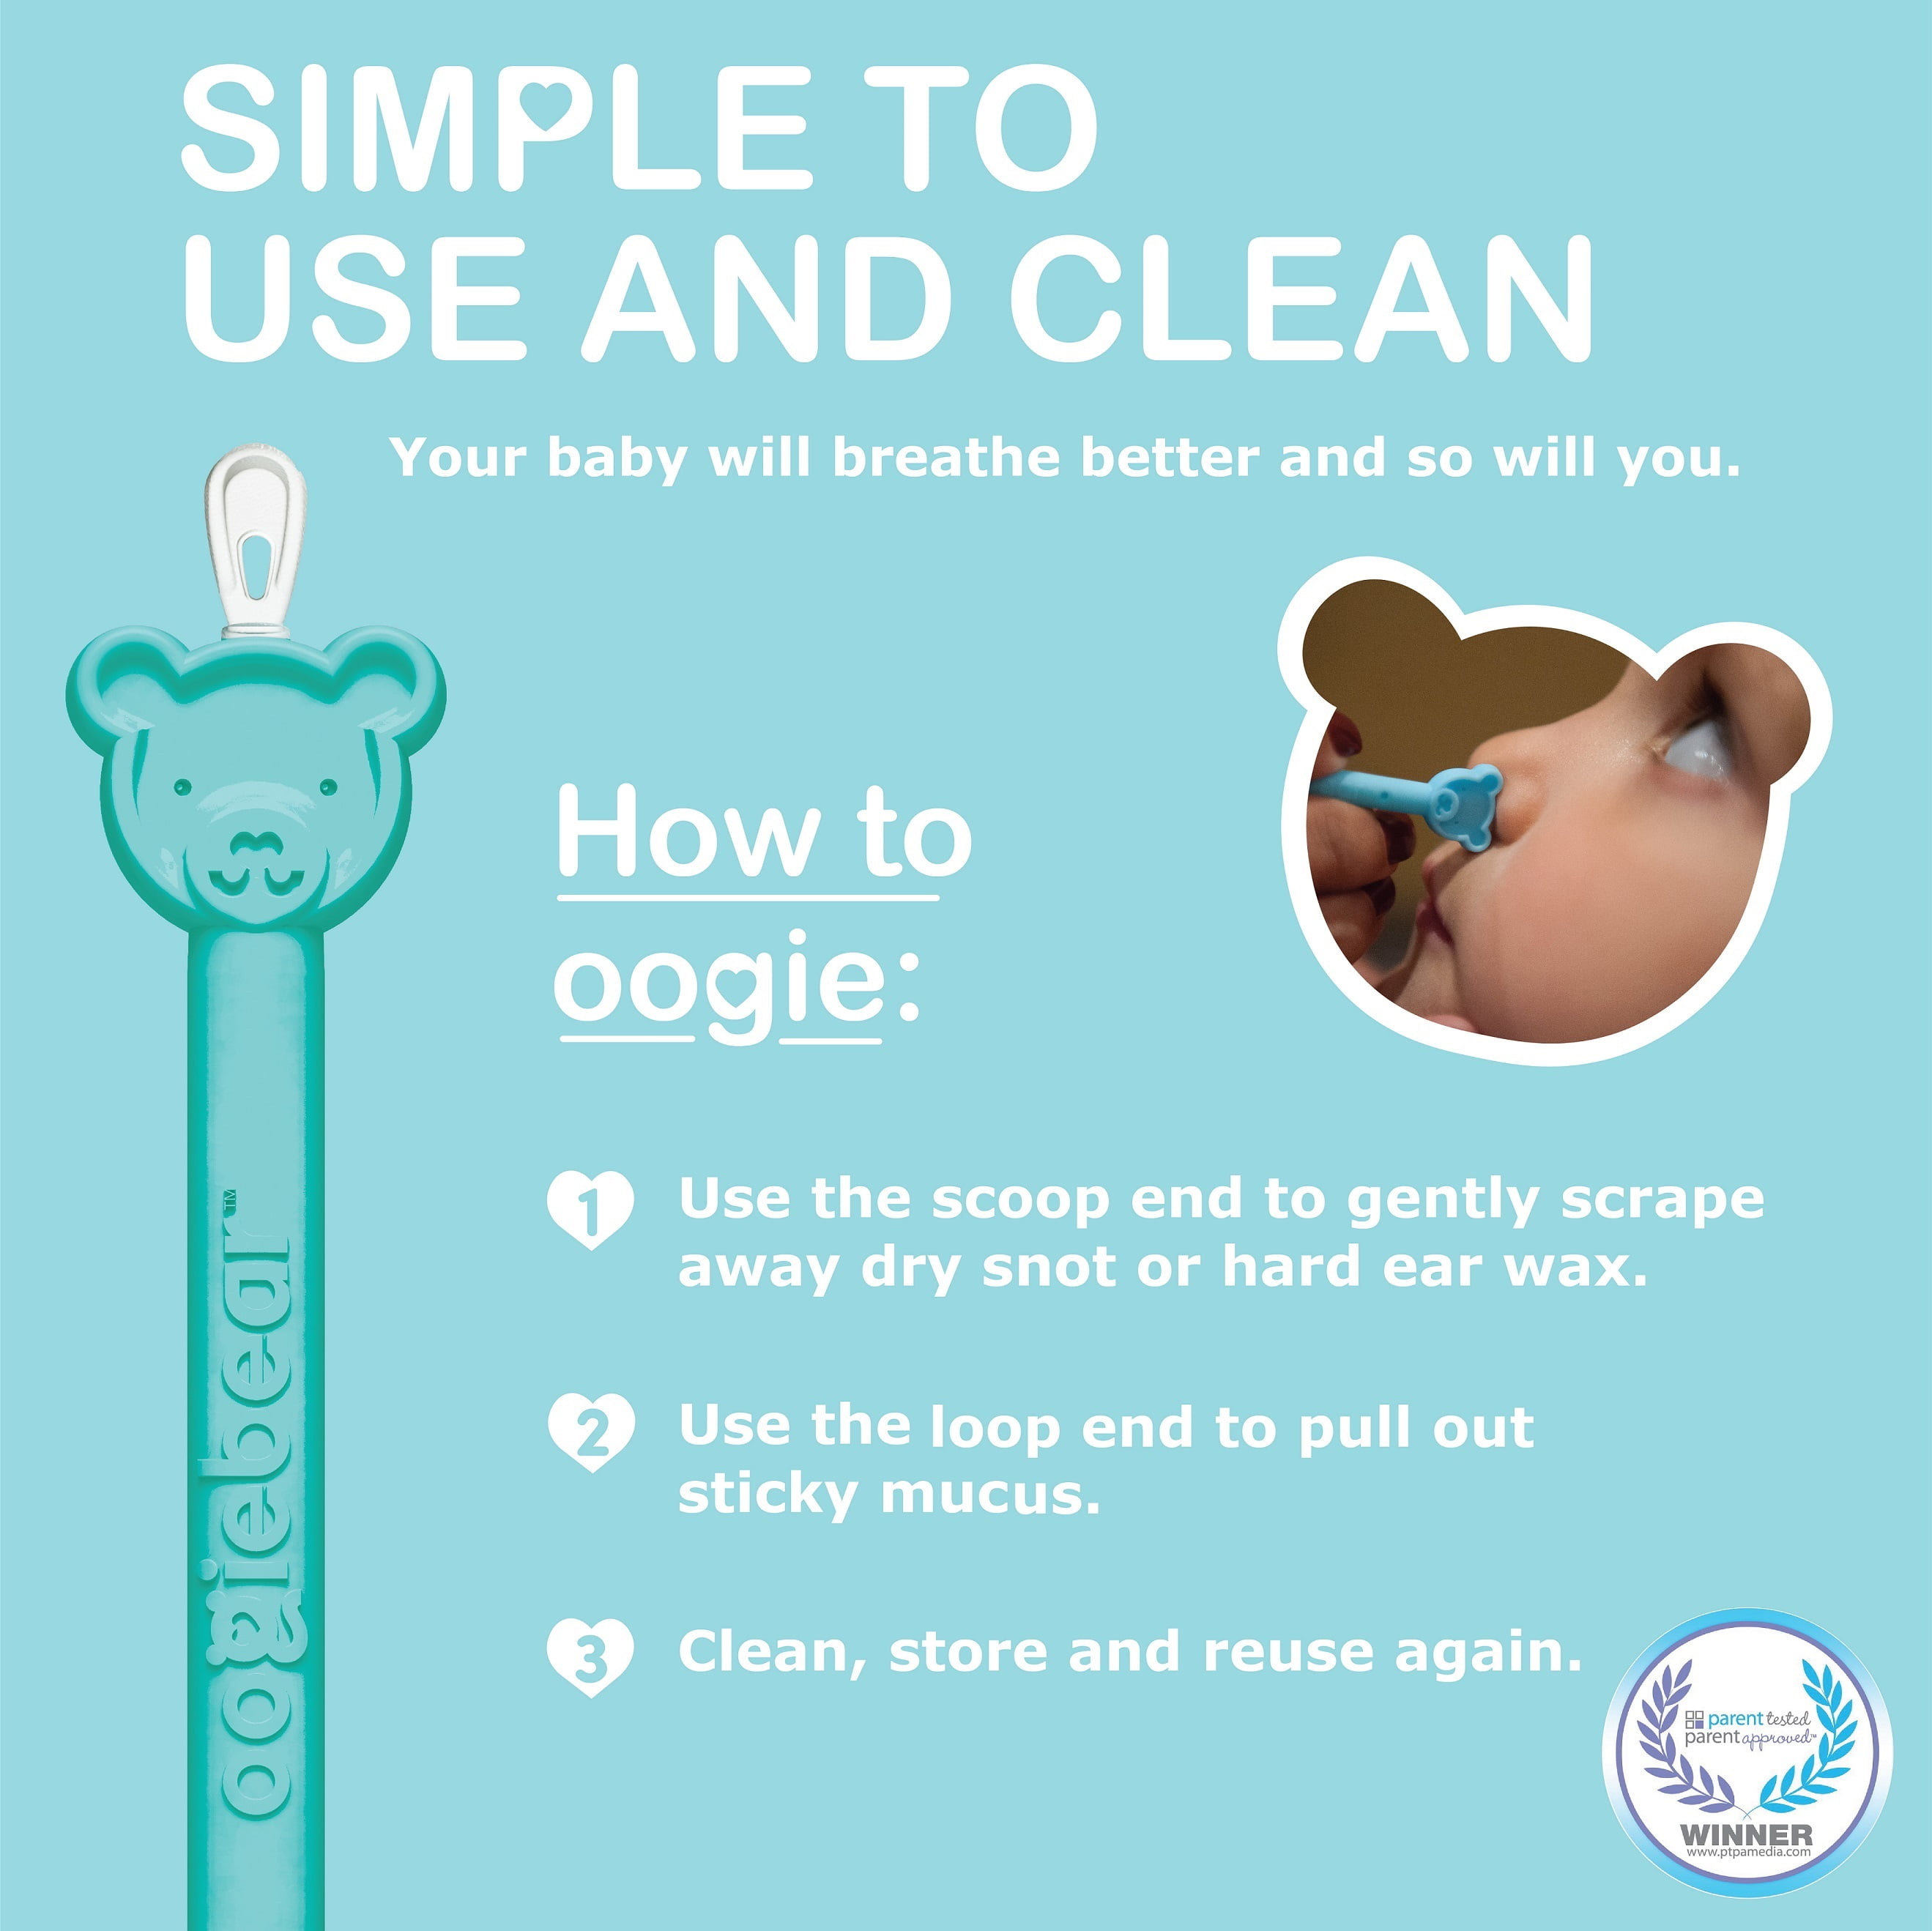 oogiebear® - The Better Booger and Ear Tool! 